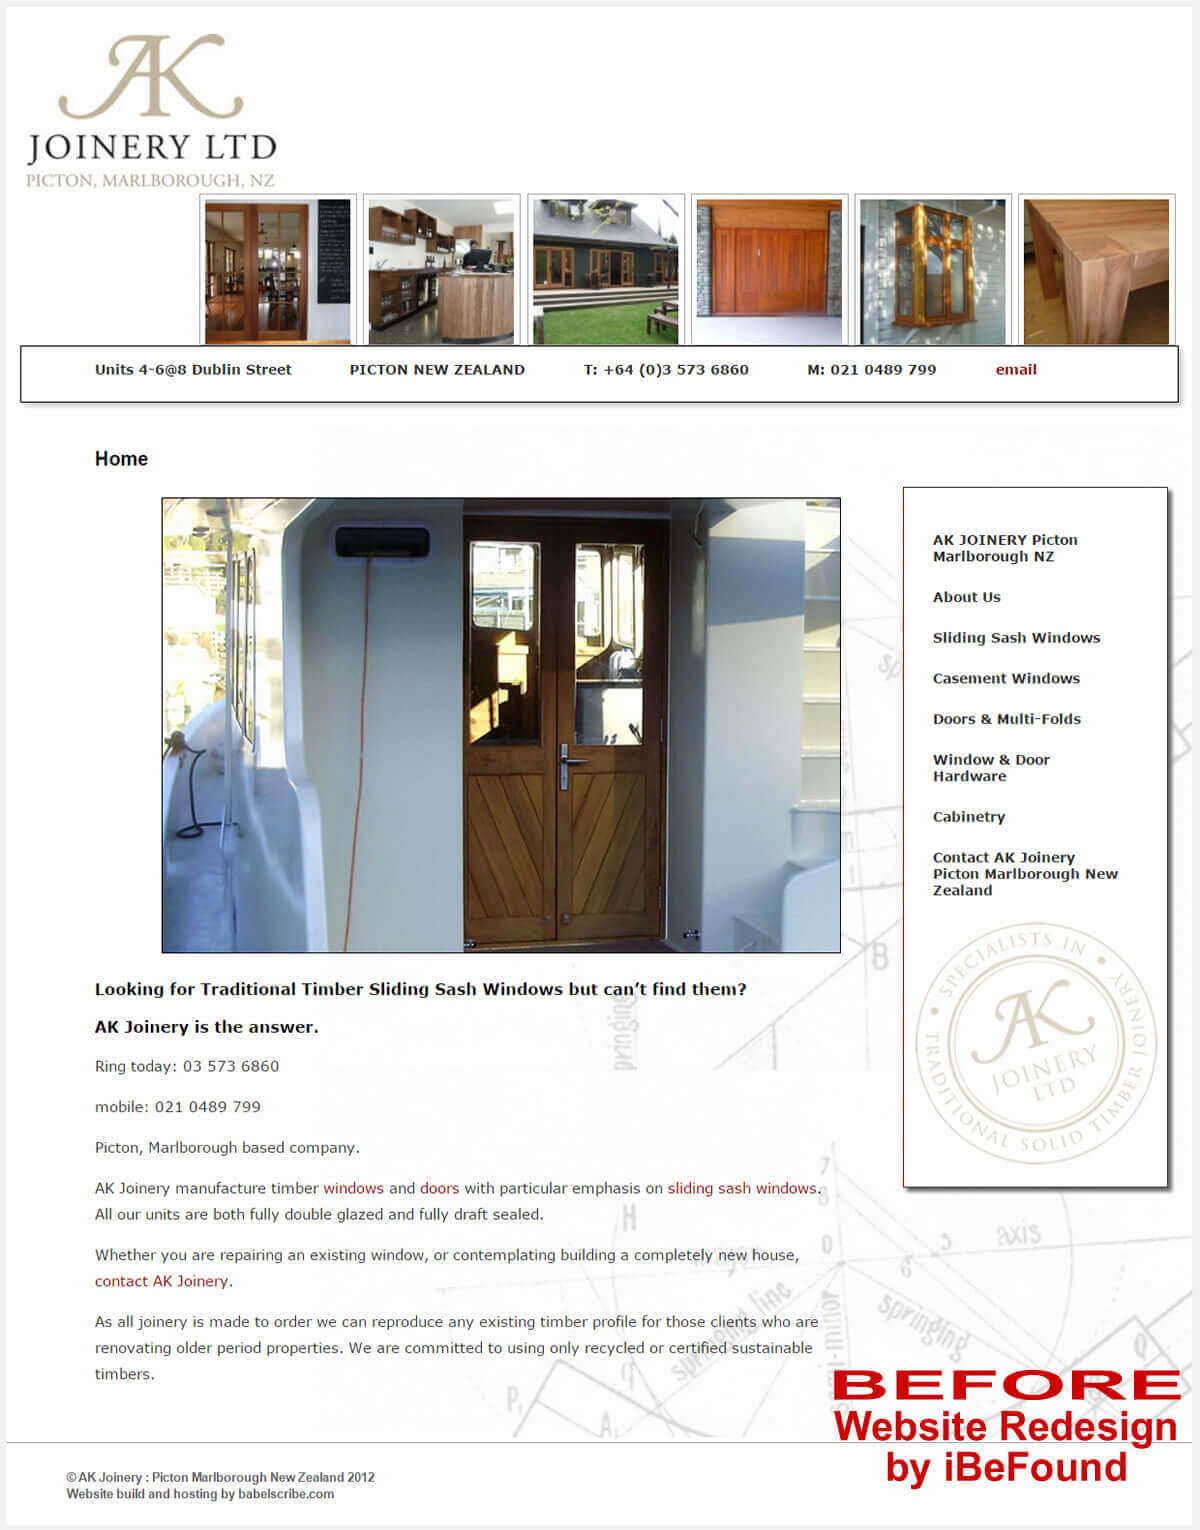 Homepage Of AK Joinery Before Website Redesign By IBeFound Digital Marketing